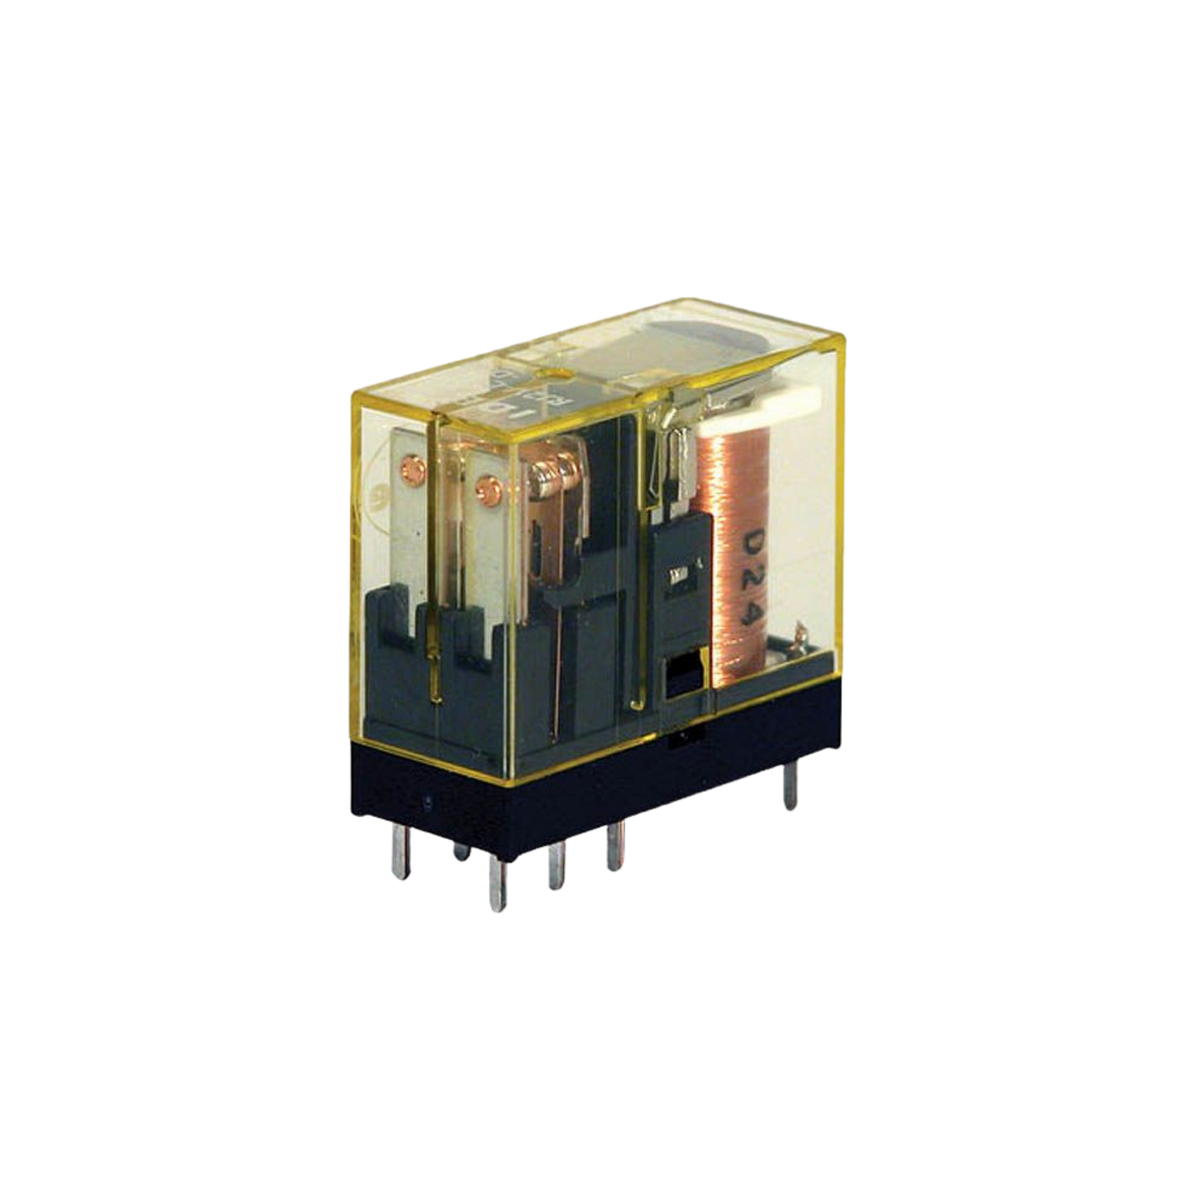 upright rectangular relay unit with clear yellow housing, wires and contacts inside, and metal tabs on the bottom